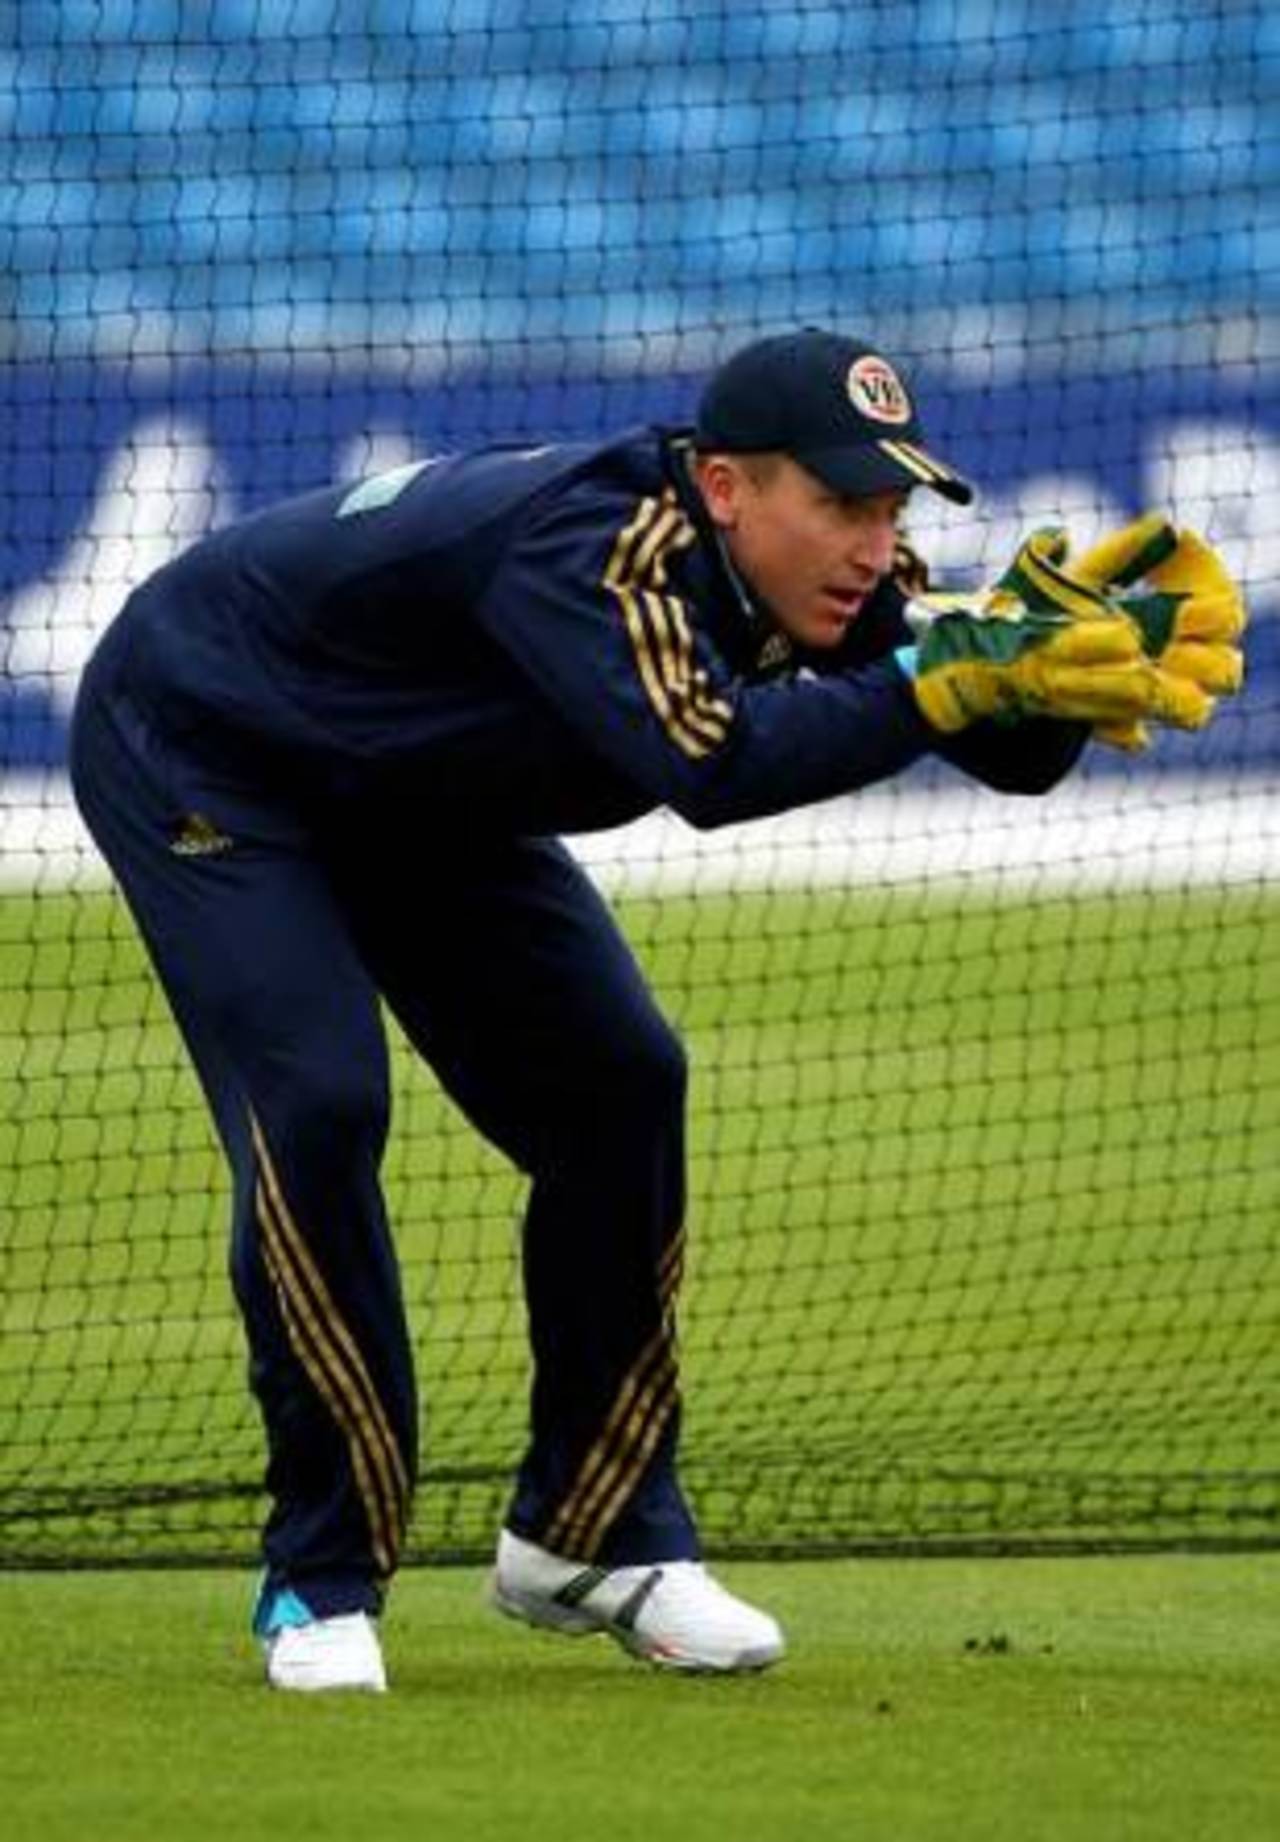 Brad Haddin with the gloves back on after his finger injury, Headingley, August 5, 2009